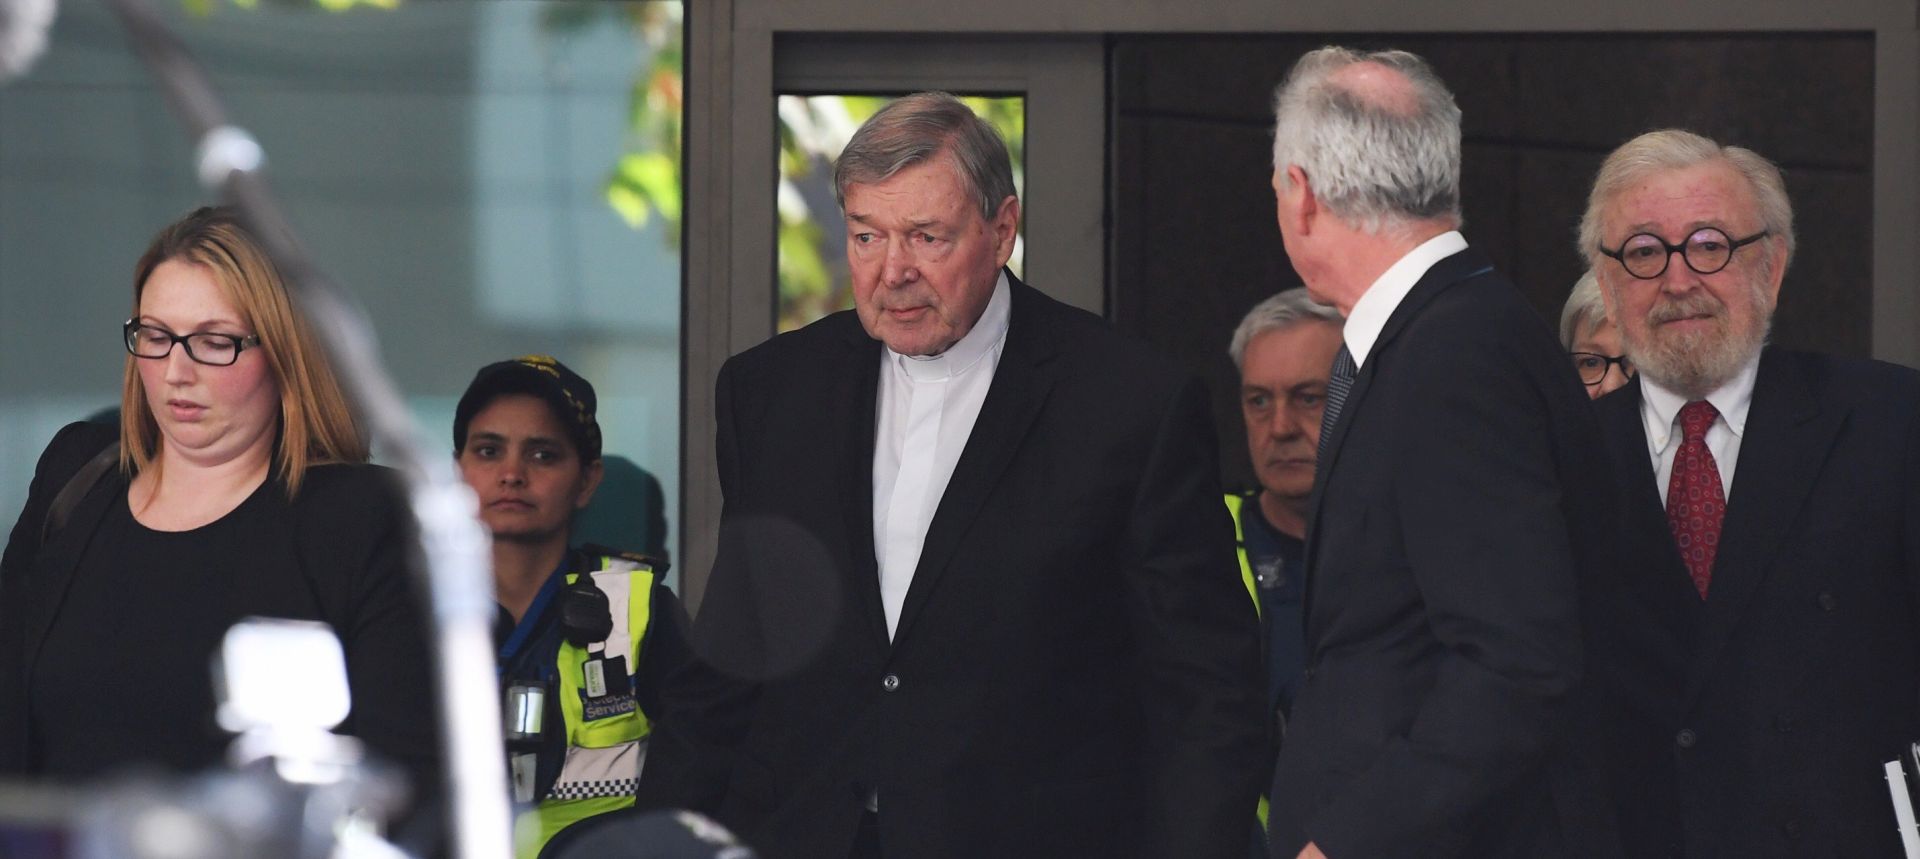 epa06703364 Australia's most senior Catholic Cardinal George Pell (C) leaves the Melbourne Magistrates Court in Melbourne, Australia, 01 May 2018. Cardinal Pell will stand trial on multiple historical sexual assault allegations, but other charges levelled against him have been discharged his committal on 01 May 2018.  EPA/JOE CASTRO NO ARCHIVING AUSTRALIA AND NEW ZEALAND OUT